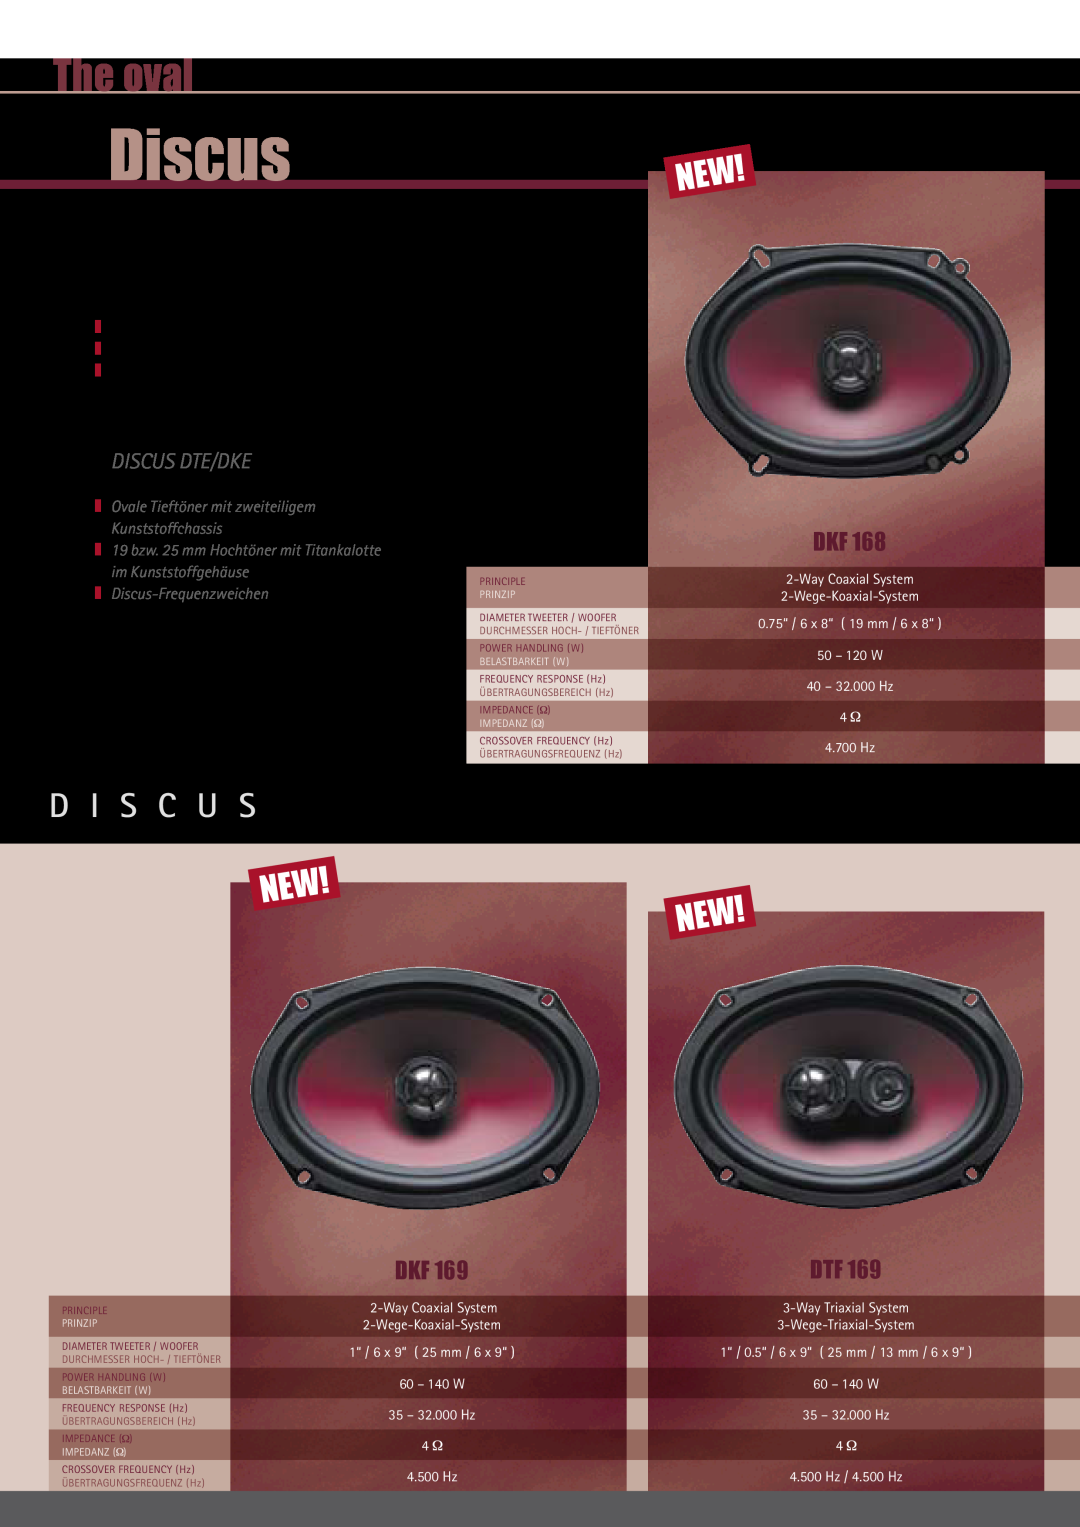 MB QUART DKF 168 manual Discus Dkf/Dtf, The oval, D I S C U S, Discus Dte/Dke, WayCoaxial System 2-Wege-Koaxial-System 